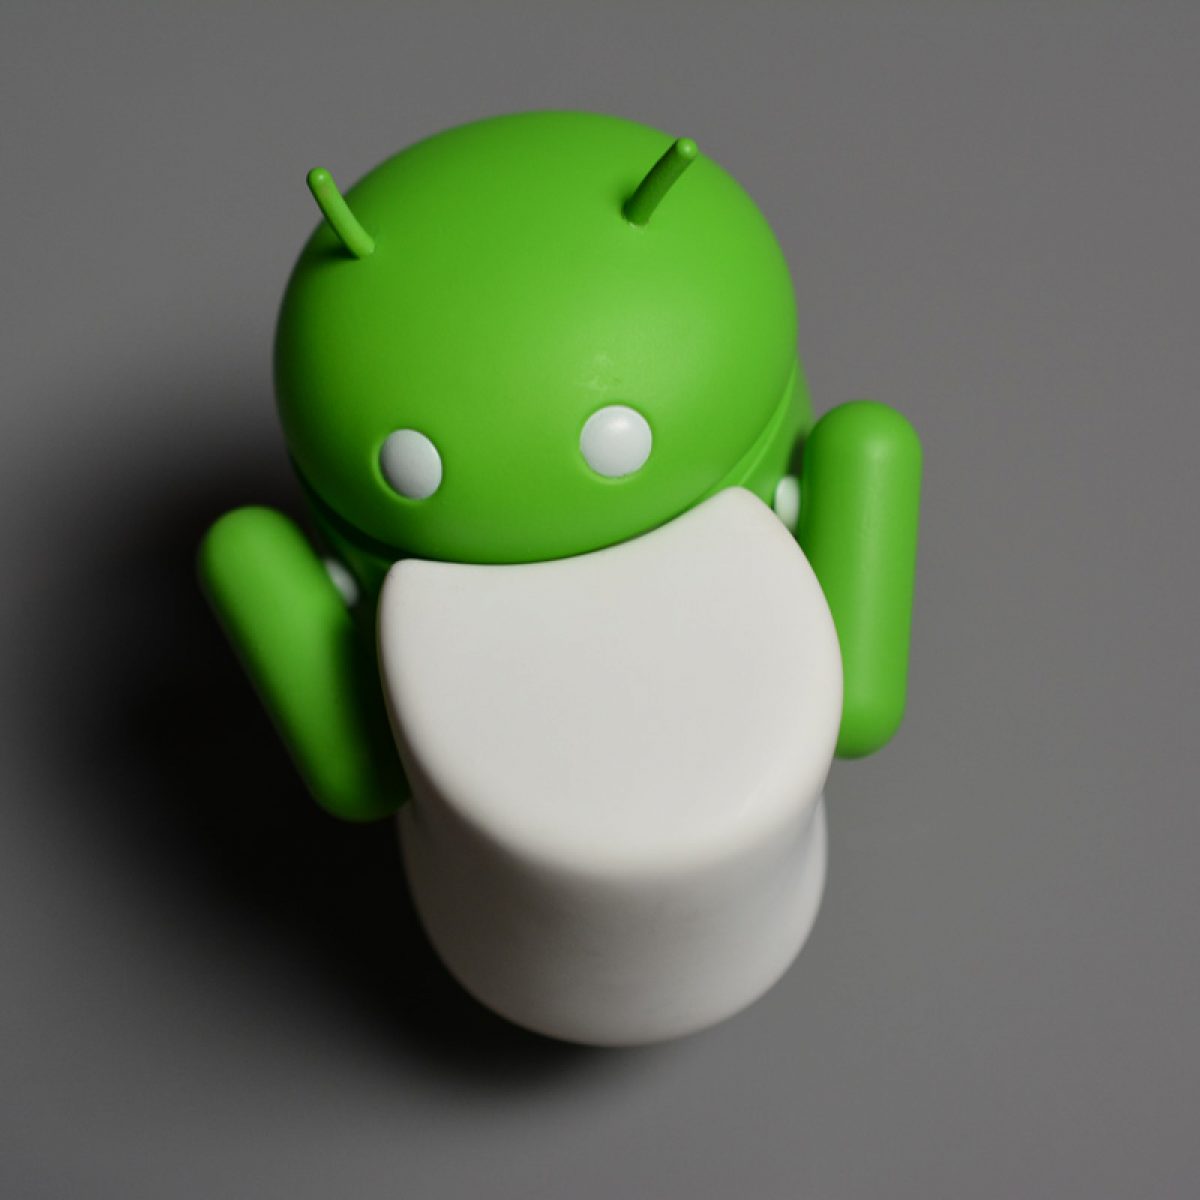 android 6.0 marshmallow zip file